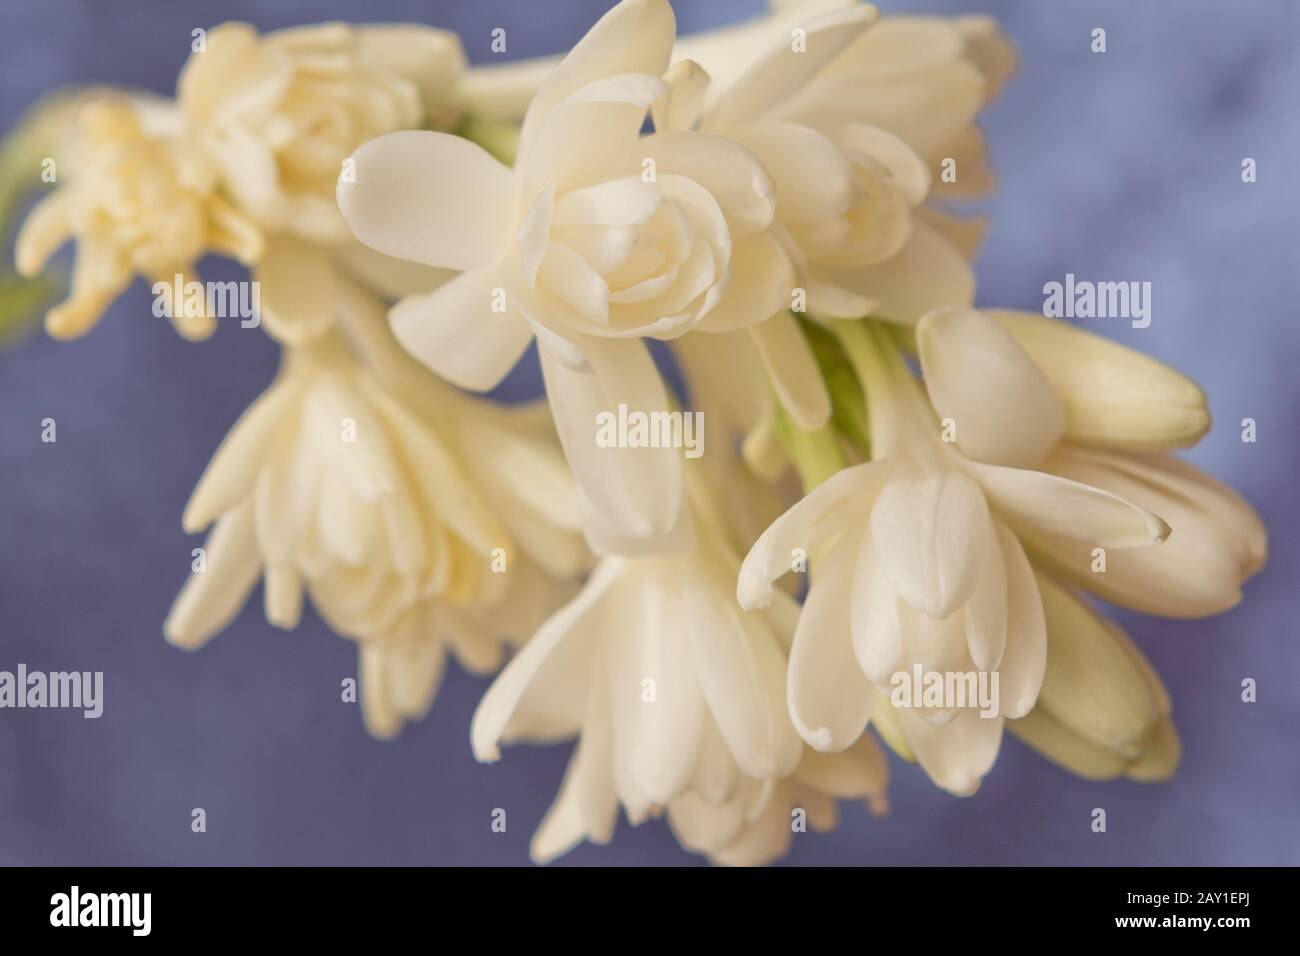 Close-up of white tuberose flowers, in front of a soft blue background. Stock Photo